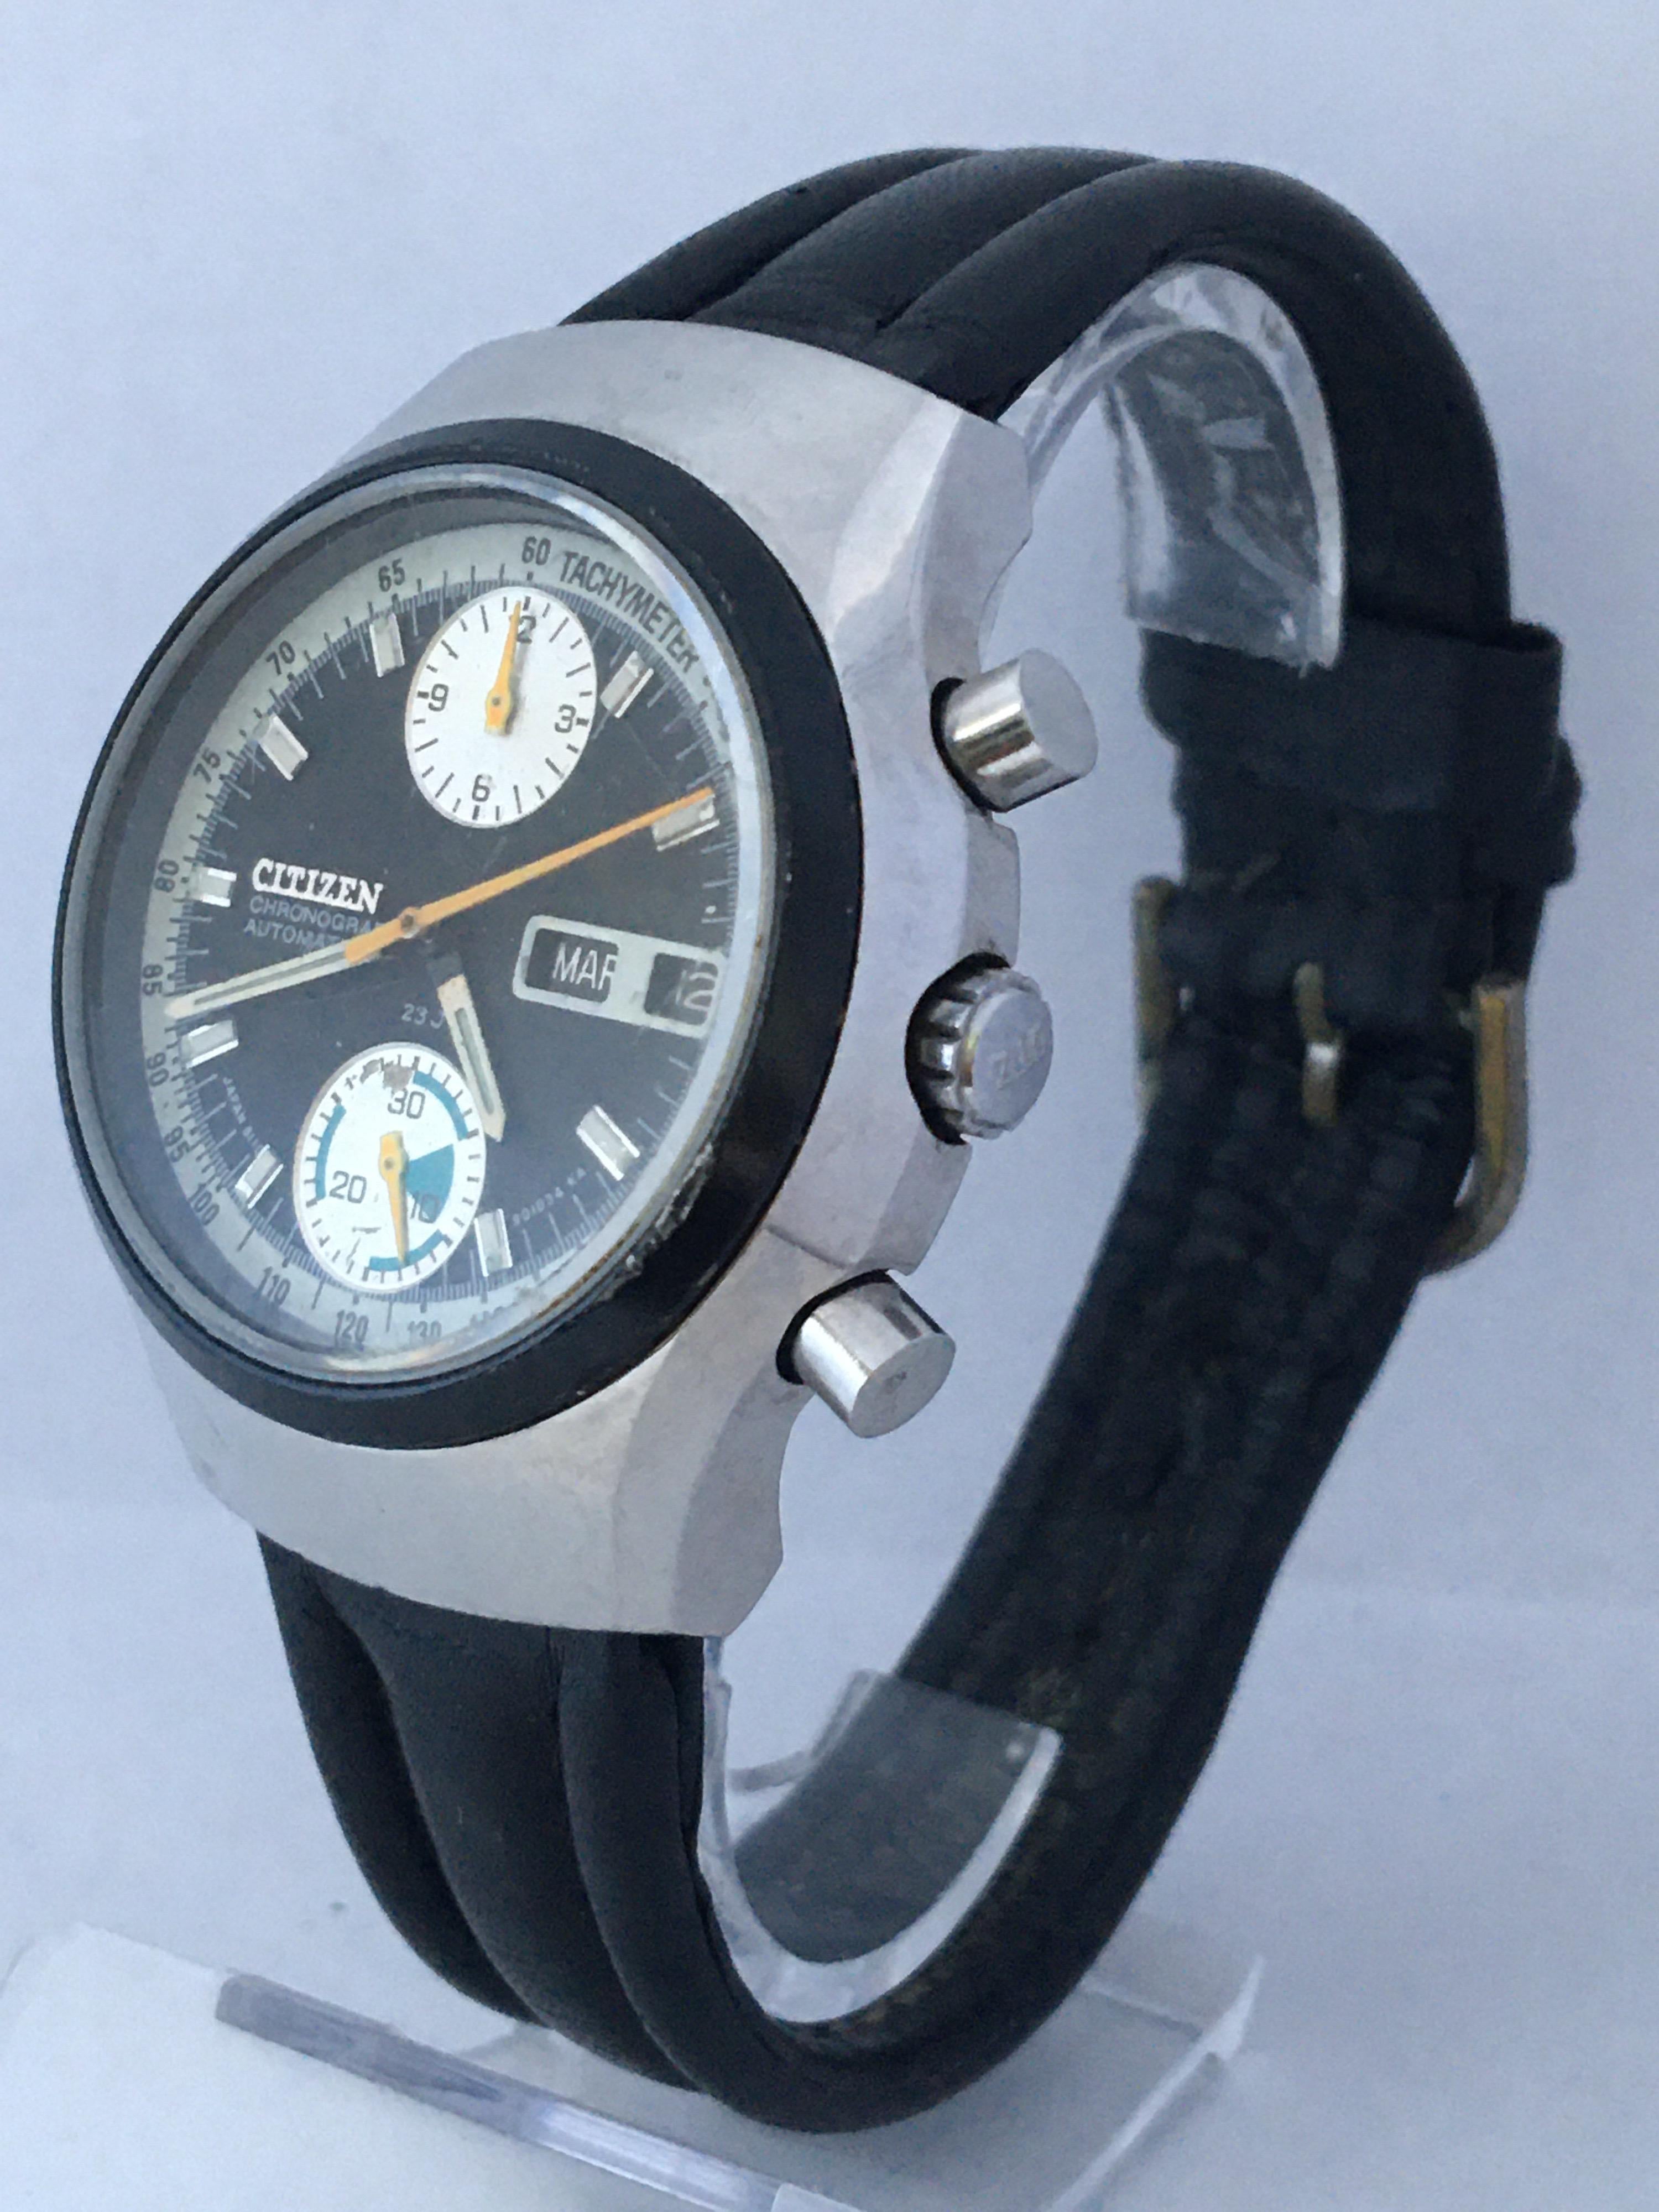 This charming pre-own vintage automatic watch is working and it is running well.  Visible signs of ageing and wear with light scratches on the glass and on the watch case as shown. The black strap is a bit worn but wearable. 

Please study the